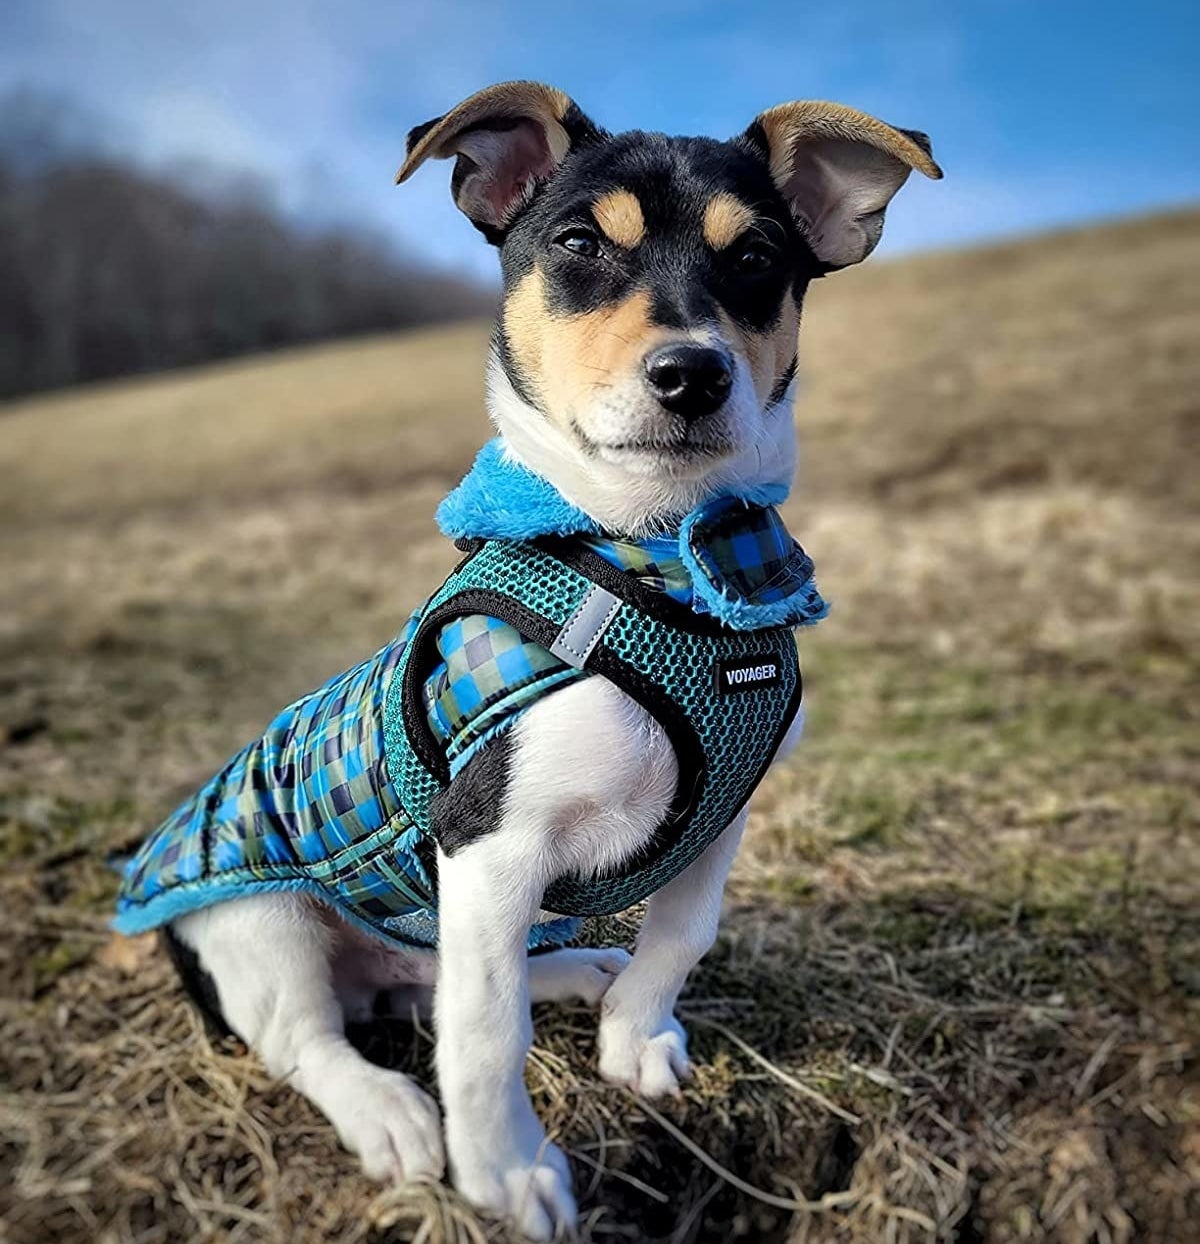 Reviewer image of their dog wearing the blue harness